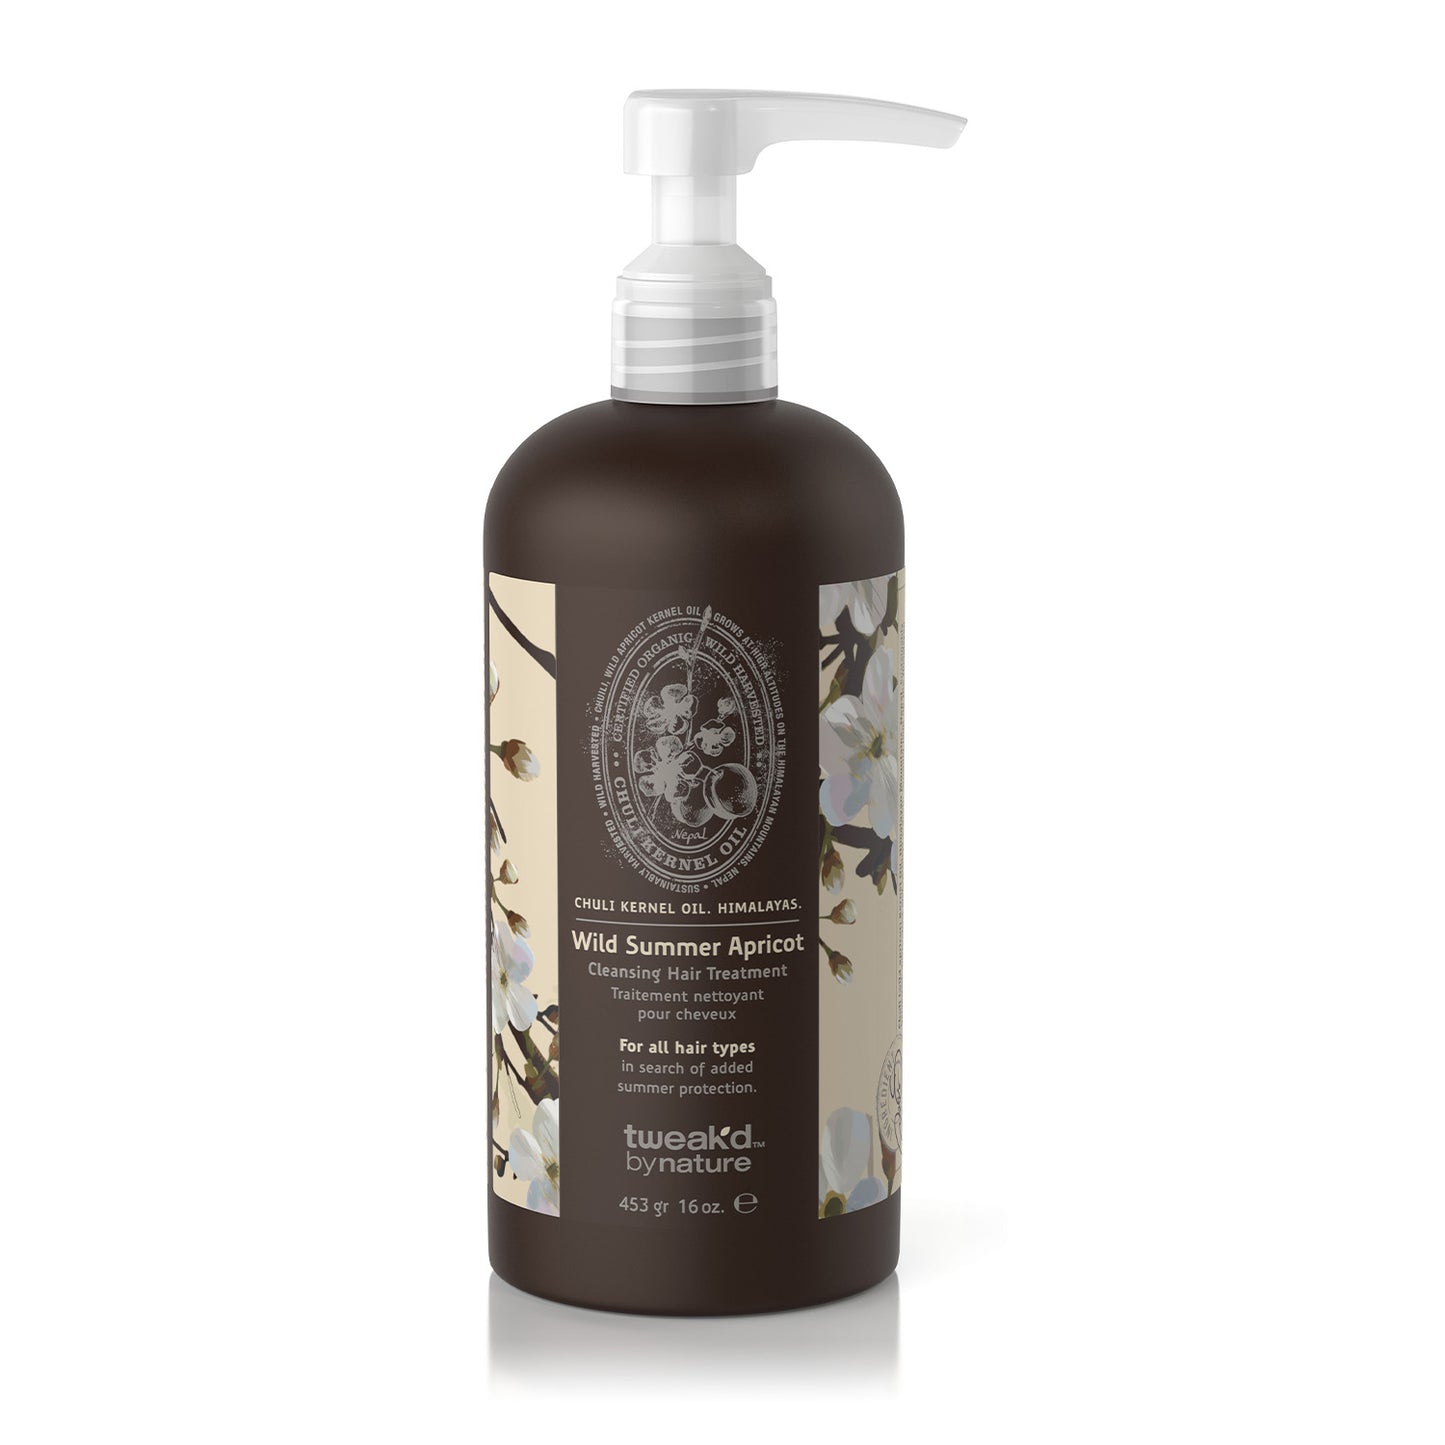 Tweak'd by Nature Wild Summer Apricot Hair Cleansing Treatment